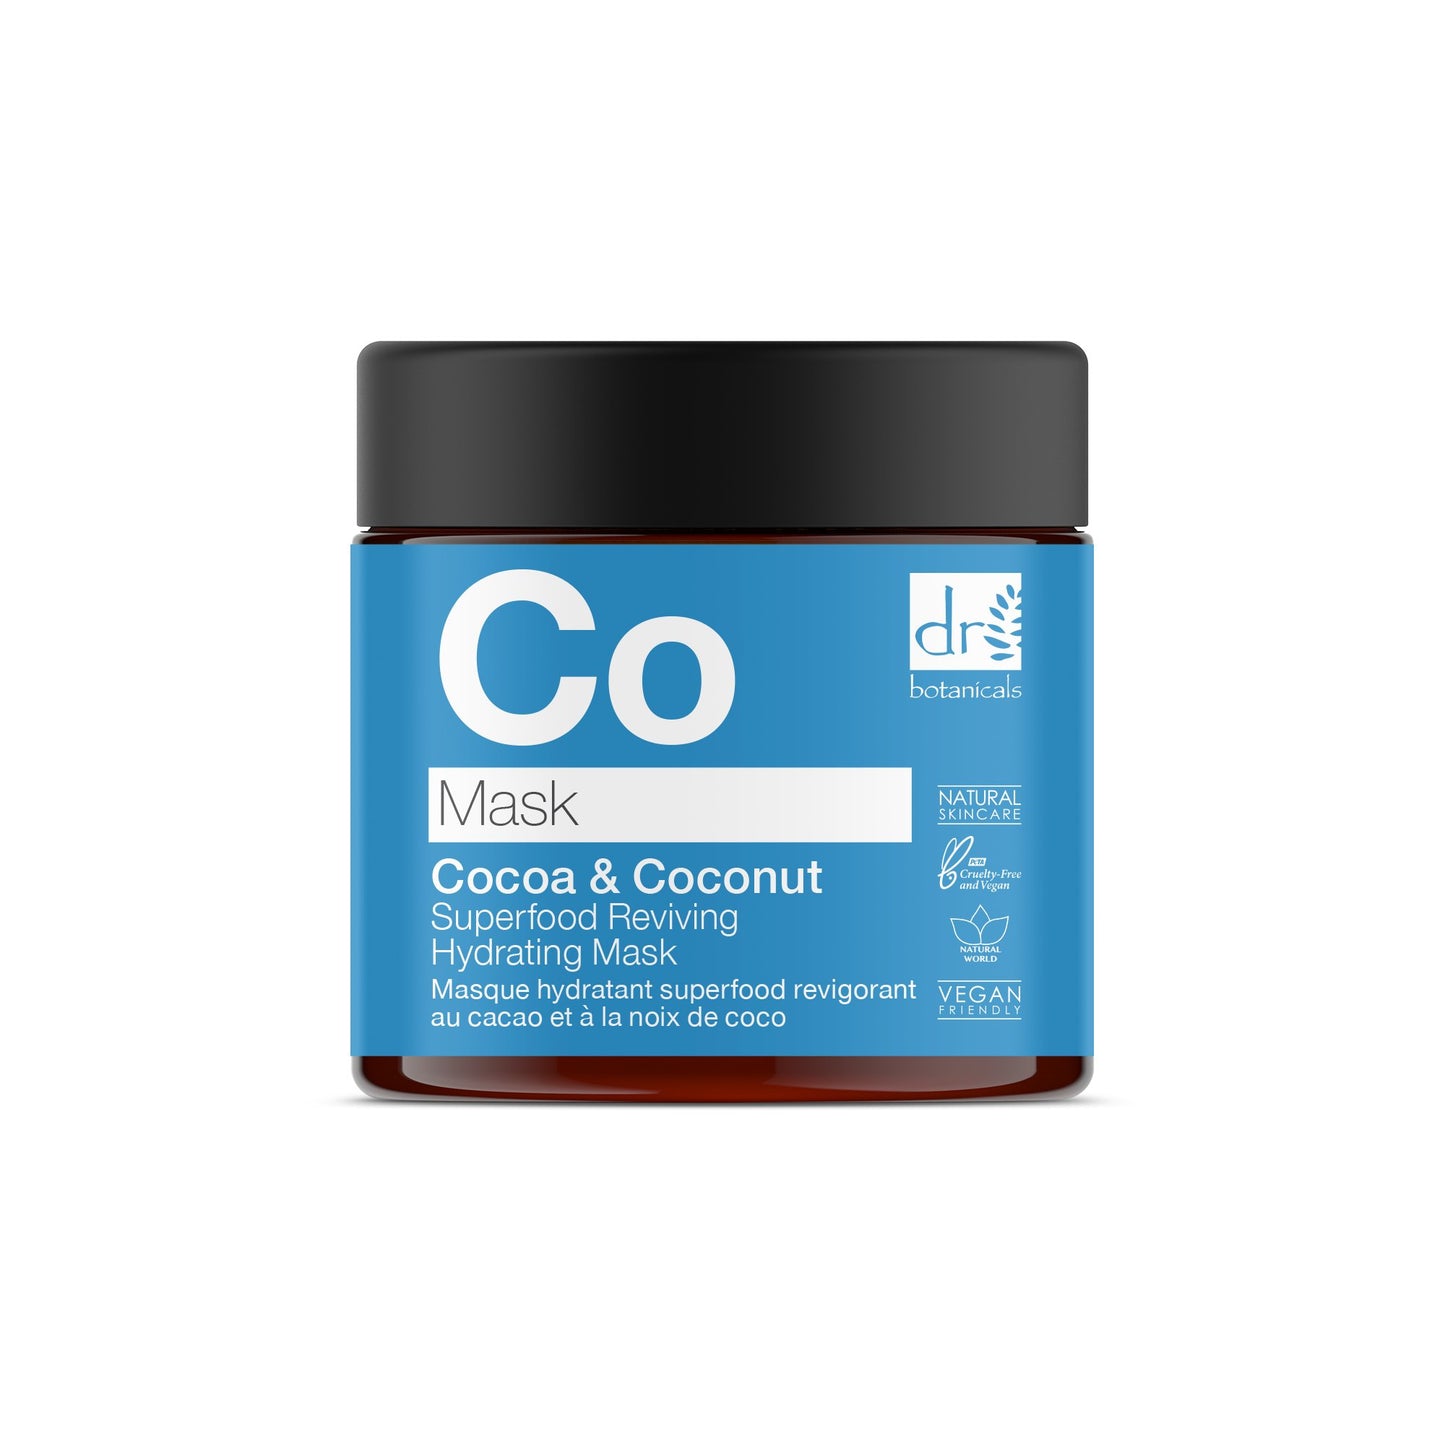 Dr Botanicals - Cocoa & Coconut Superfood Reviving Hydrating Mask